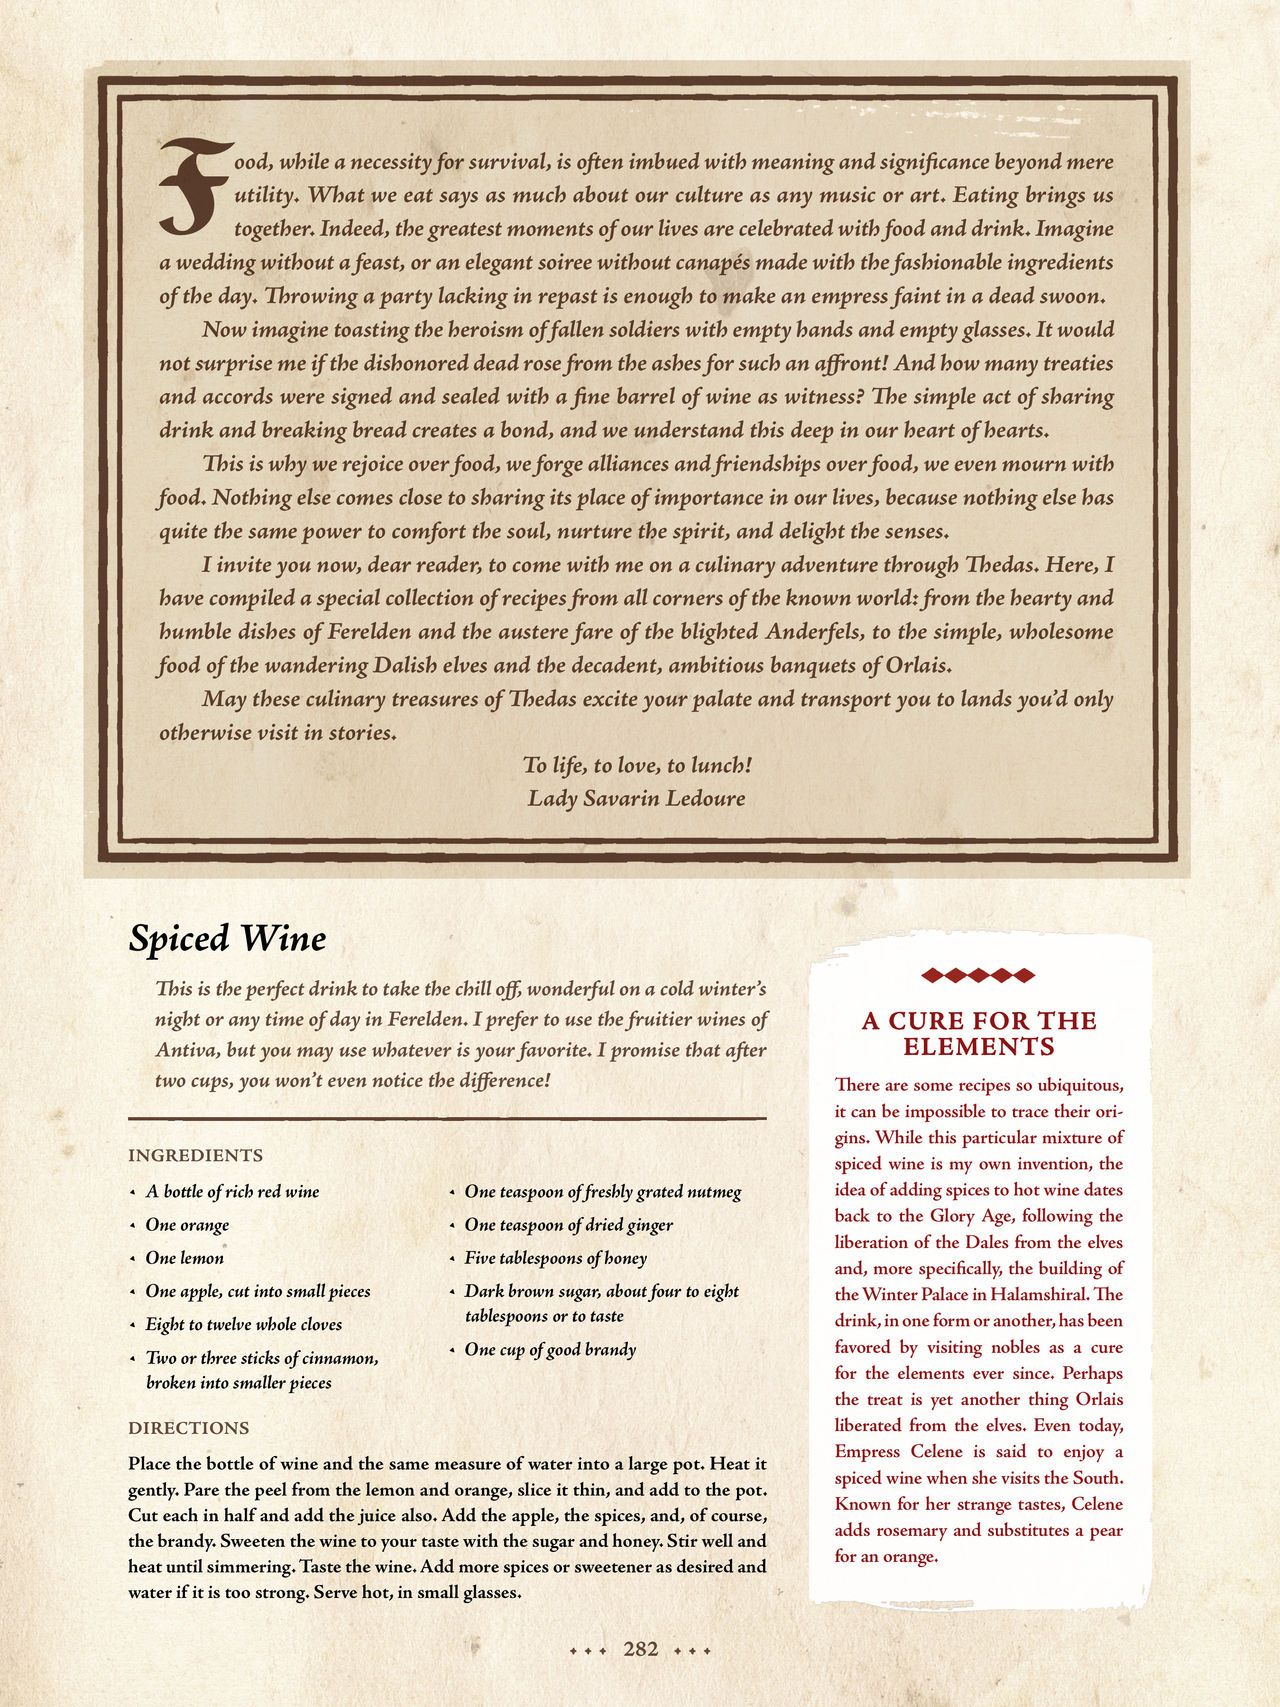 Dragon Age - The World of Thedas v02 273